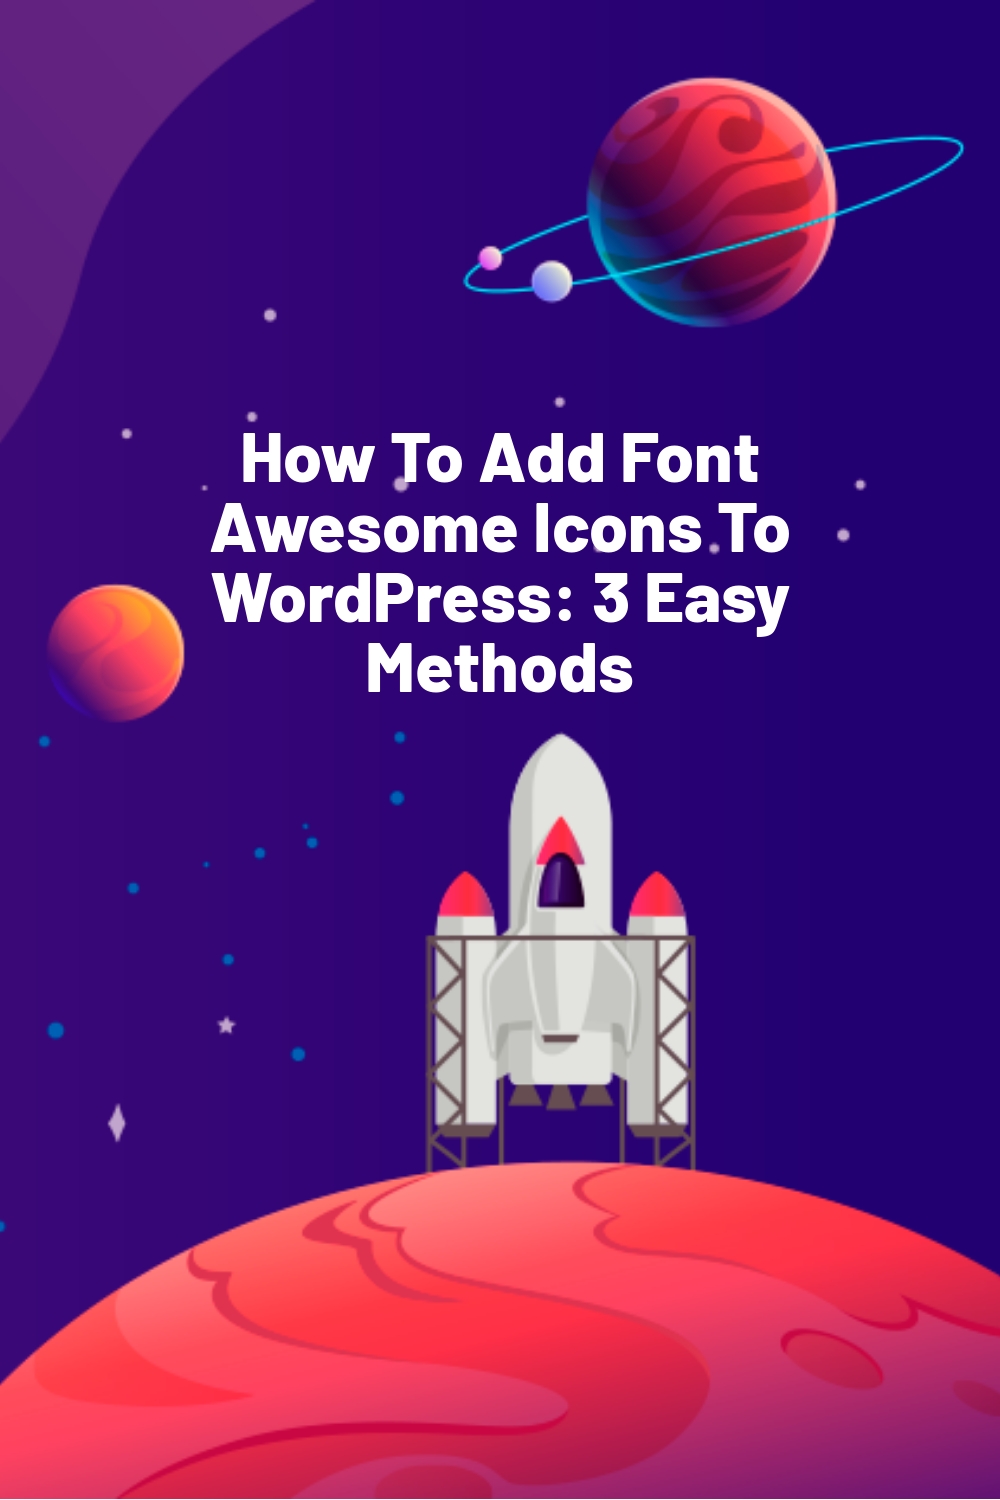 How To Add Font Awesome Icons To WordPress: 3 Easy Methods